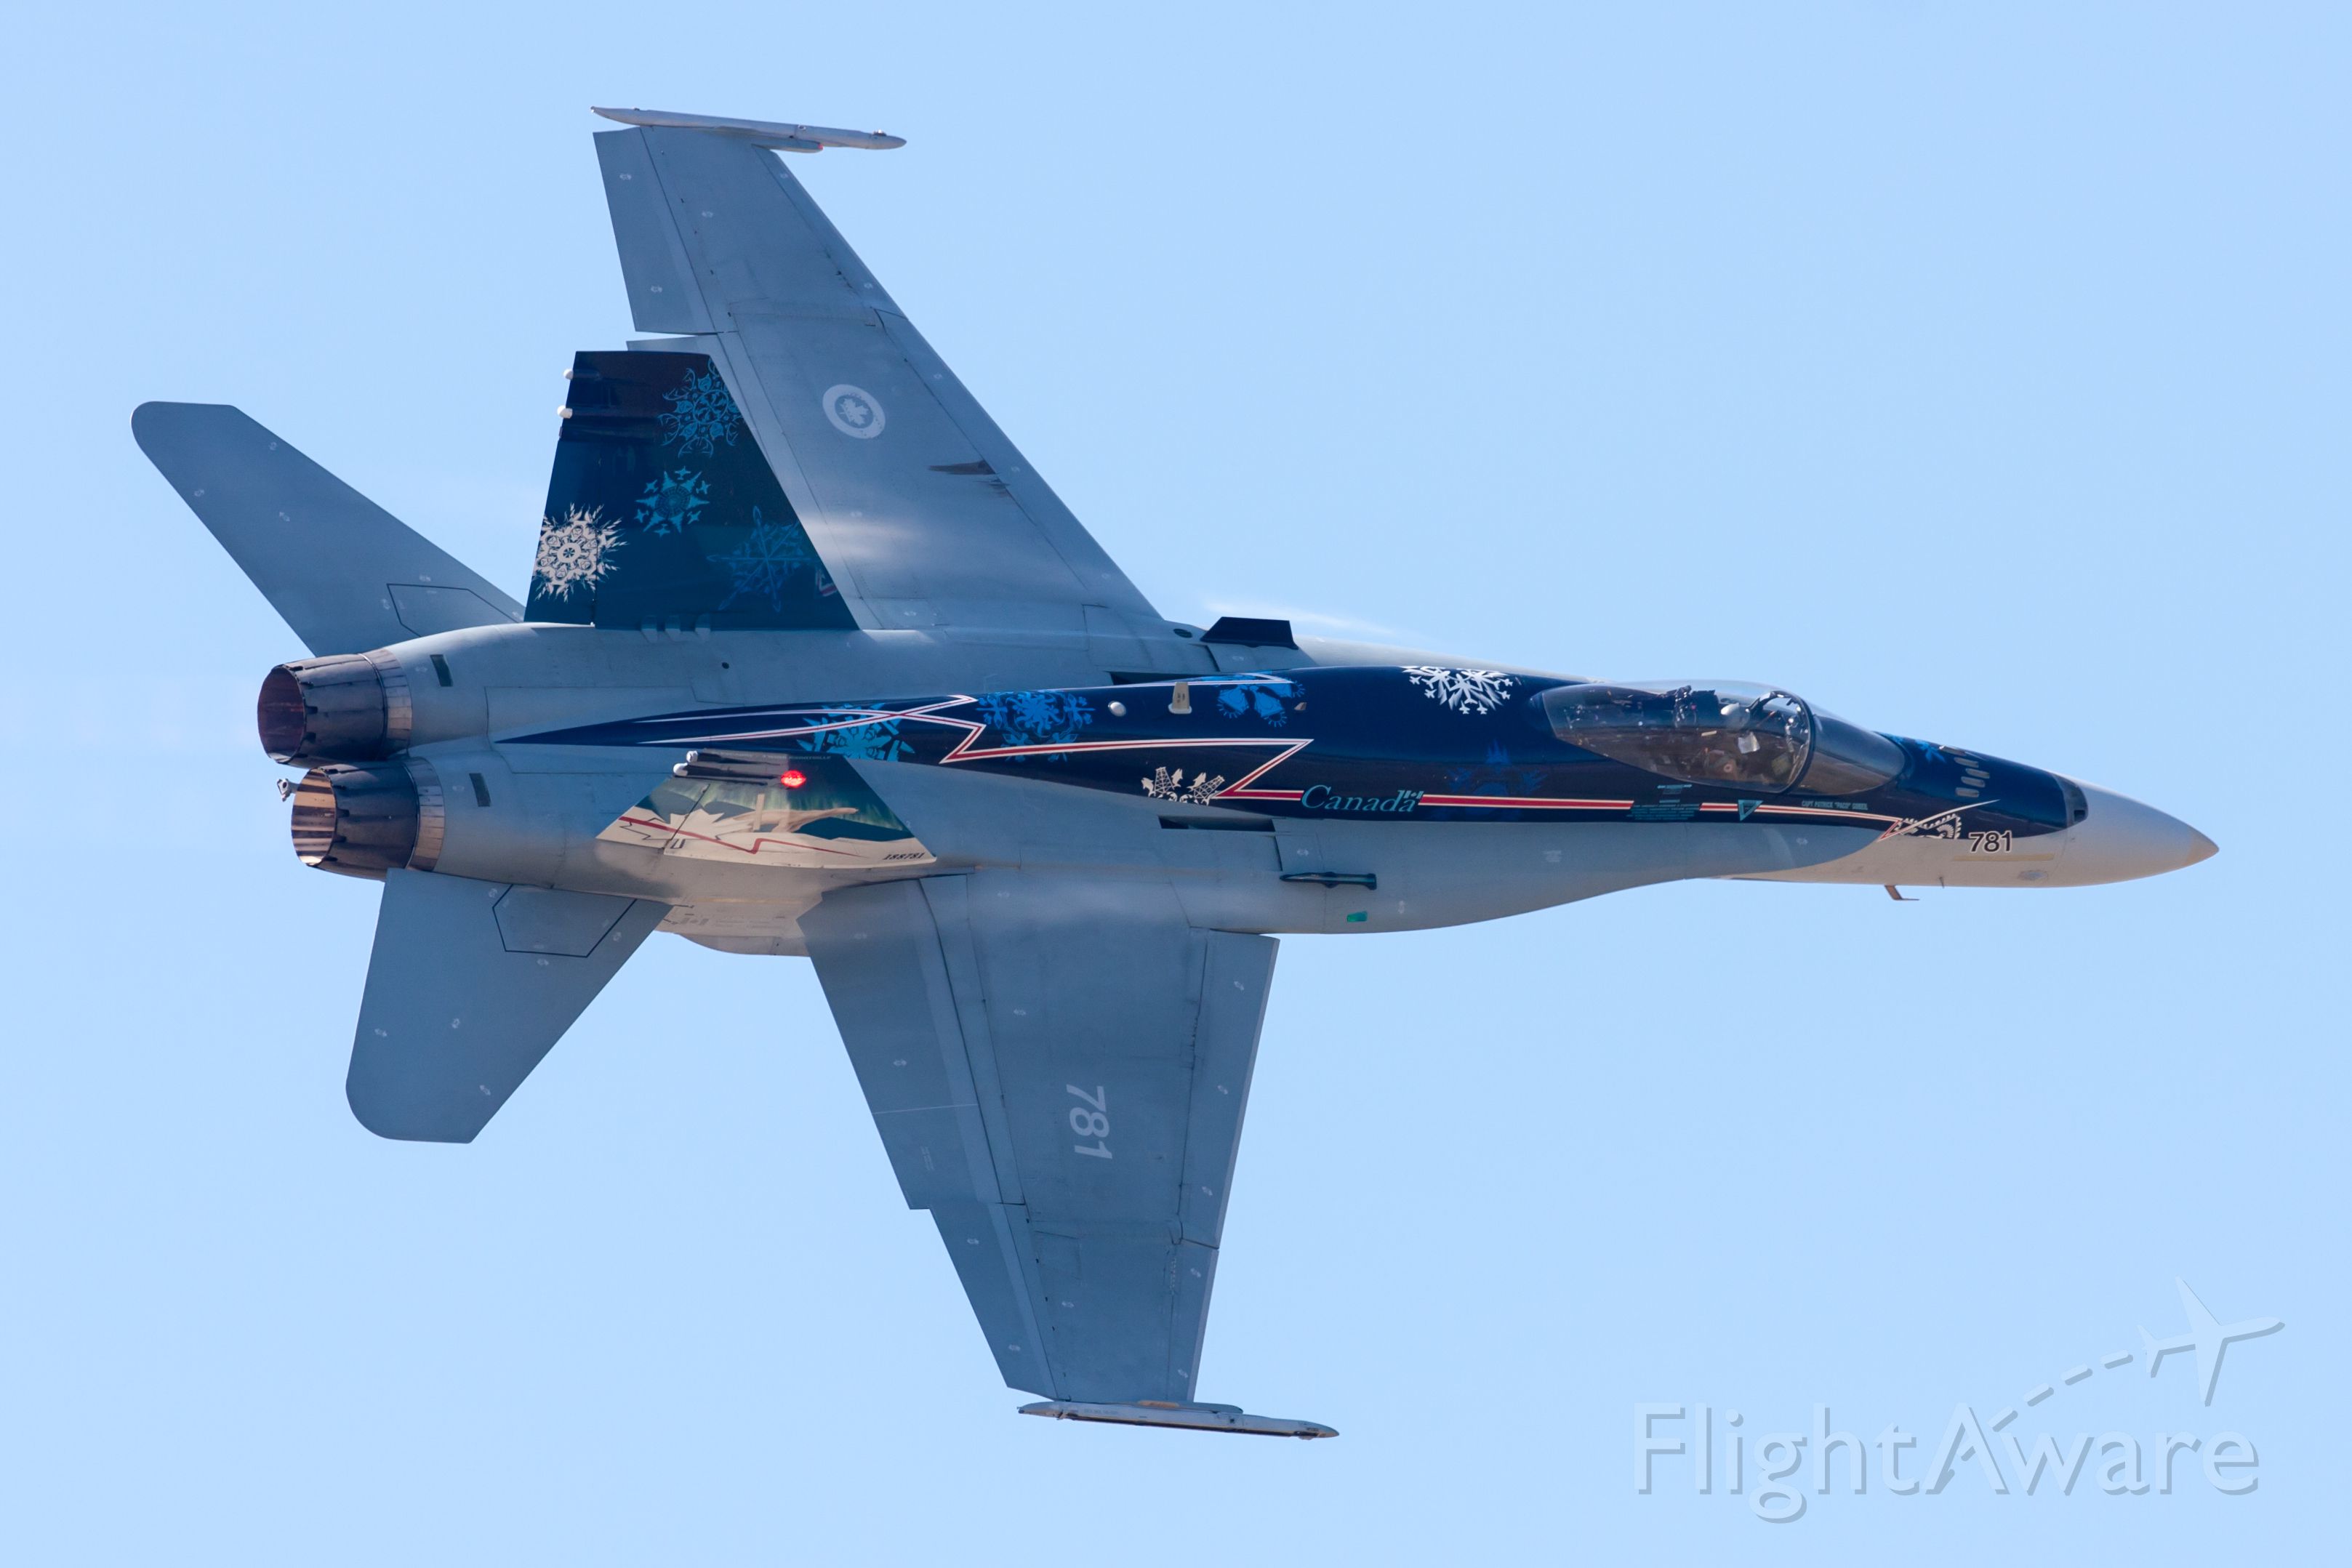 McDonnell Douglas FA-18 Hornet (N781) - Canadian CF-18 demo plane at the 2012 Abbotsford Airshow.